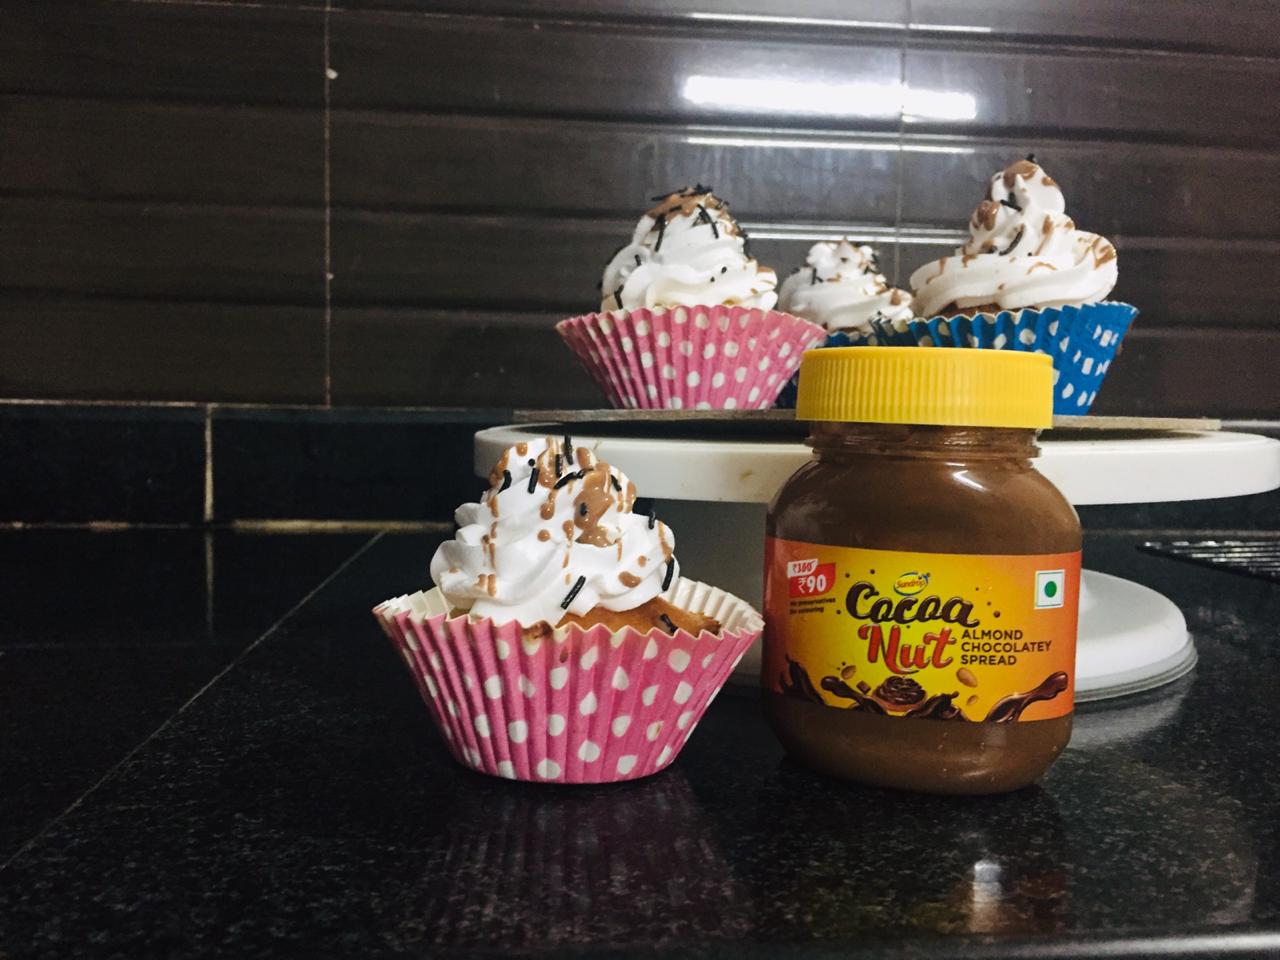 Vanilla Cupcakes with Chocolate filled centre